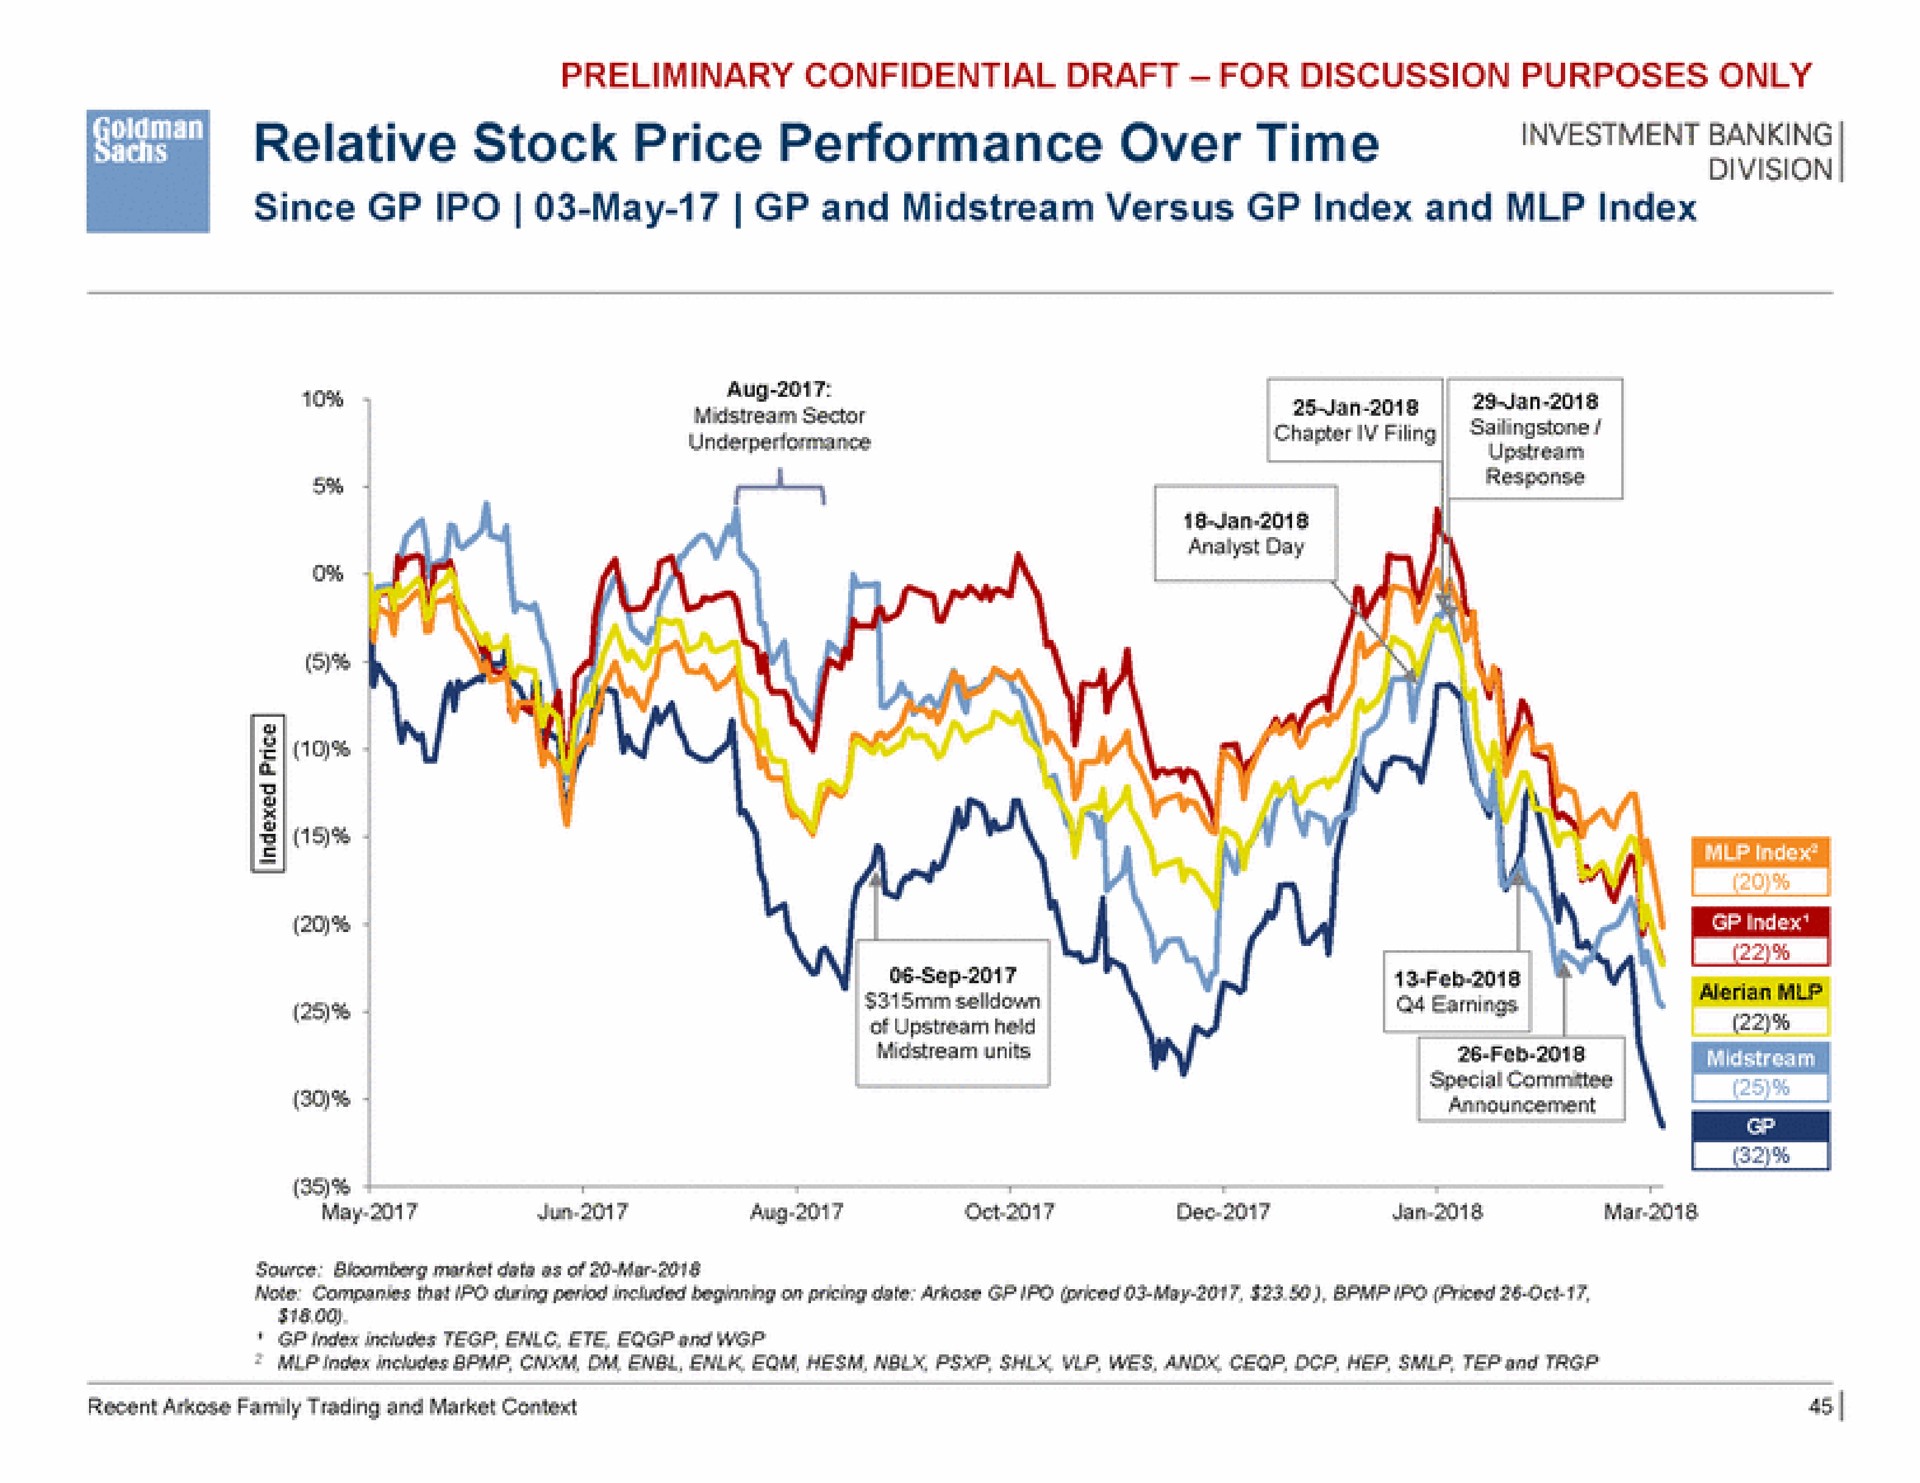 relative stock price performance over time division a | Goldman Sachs